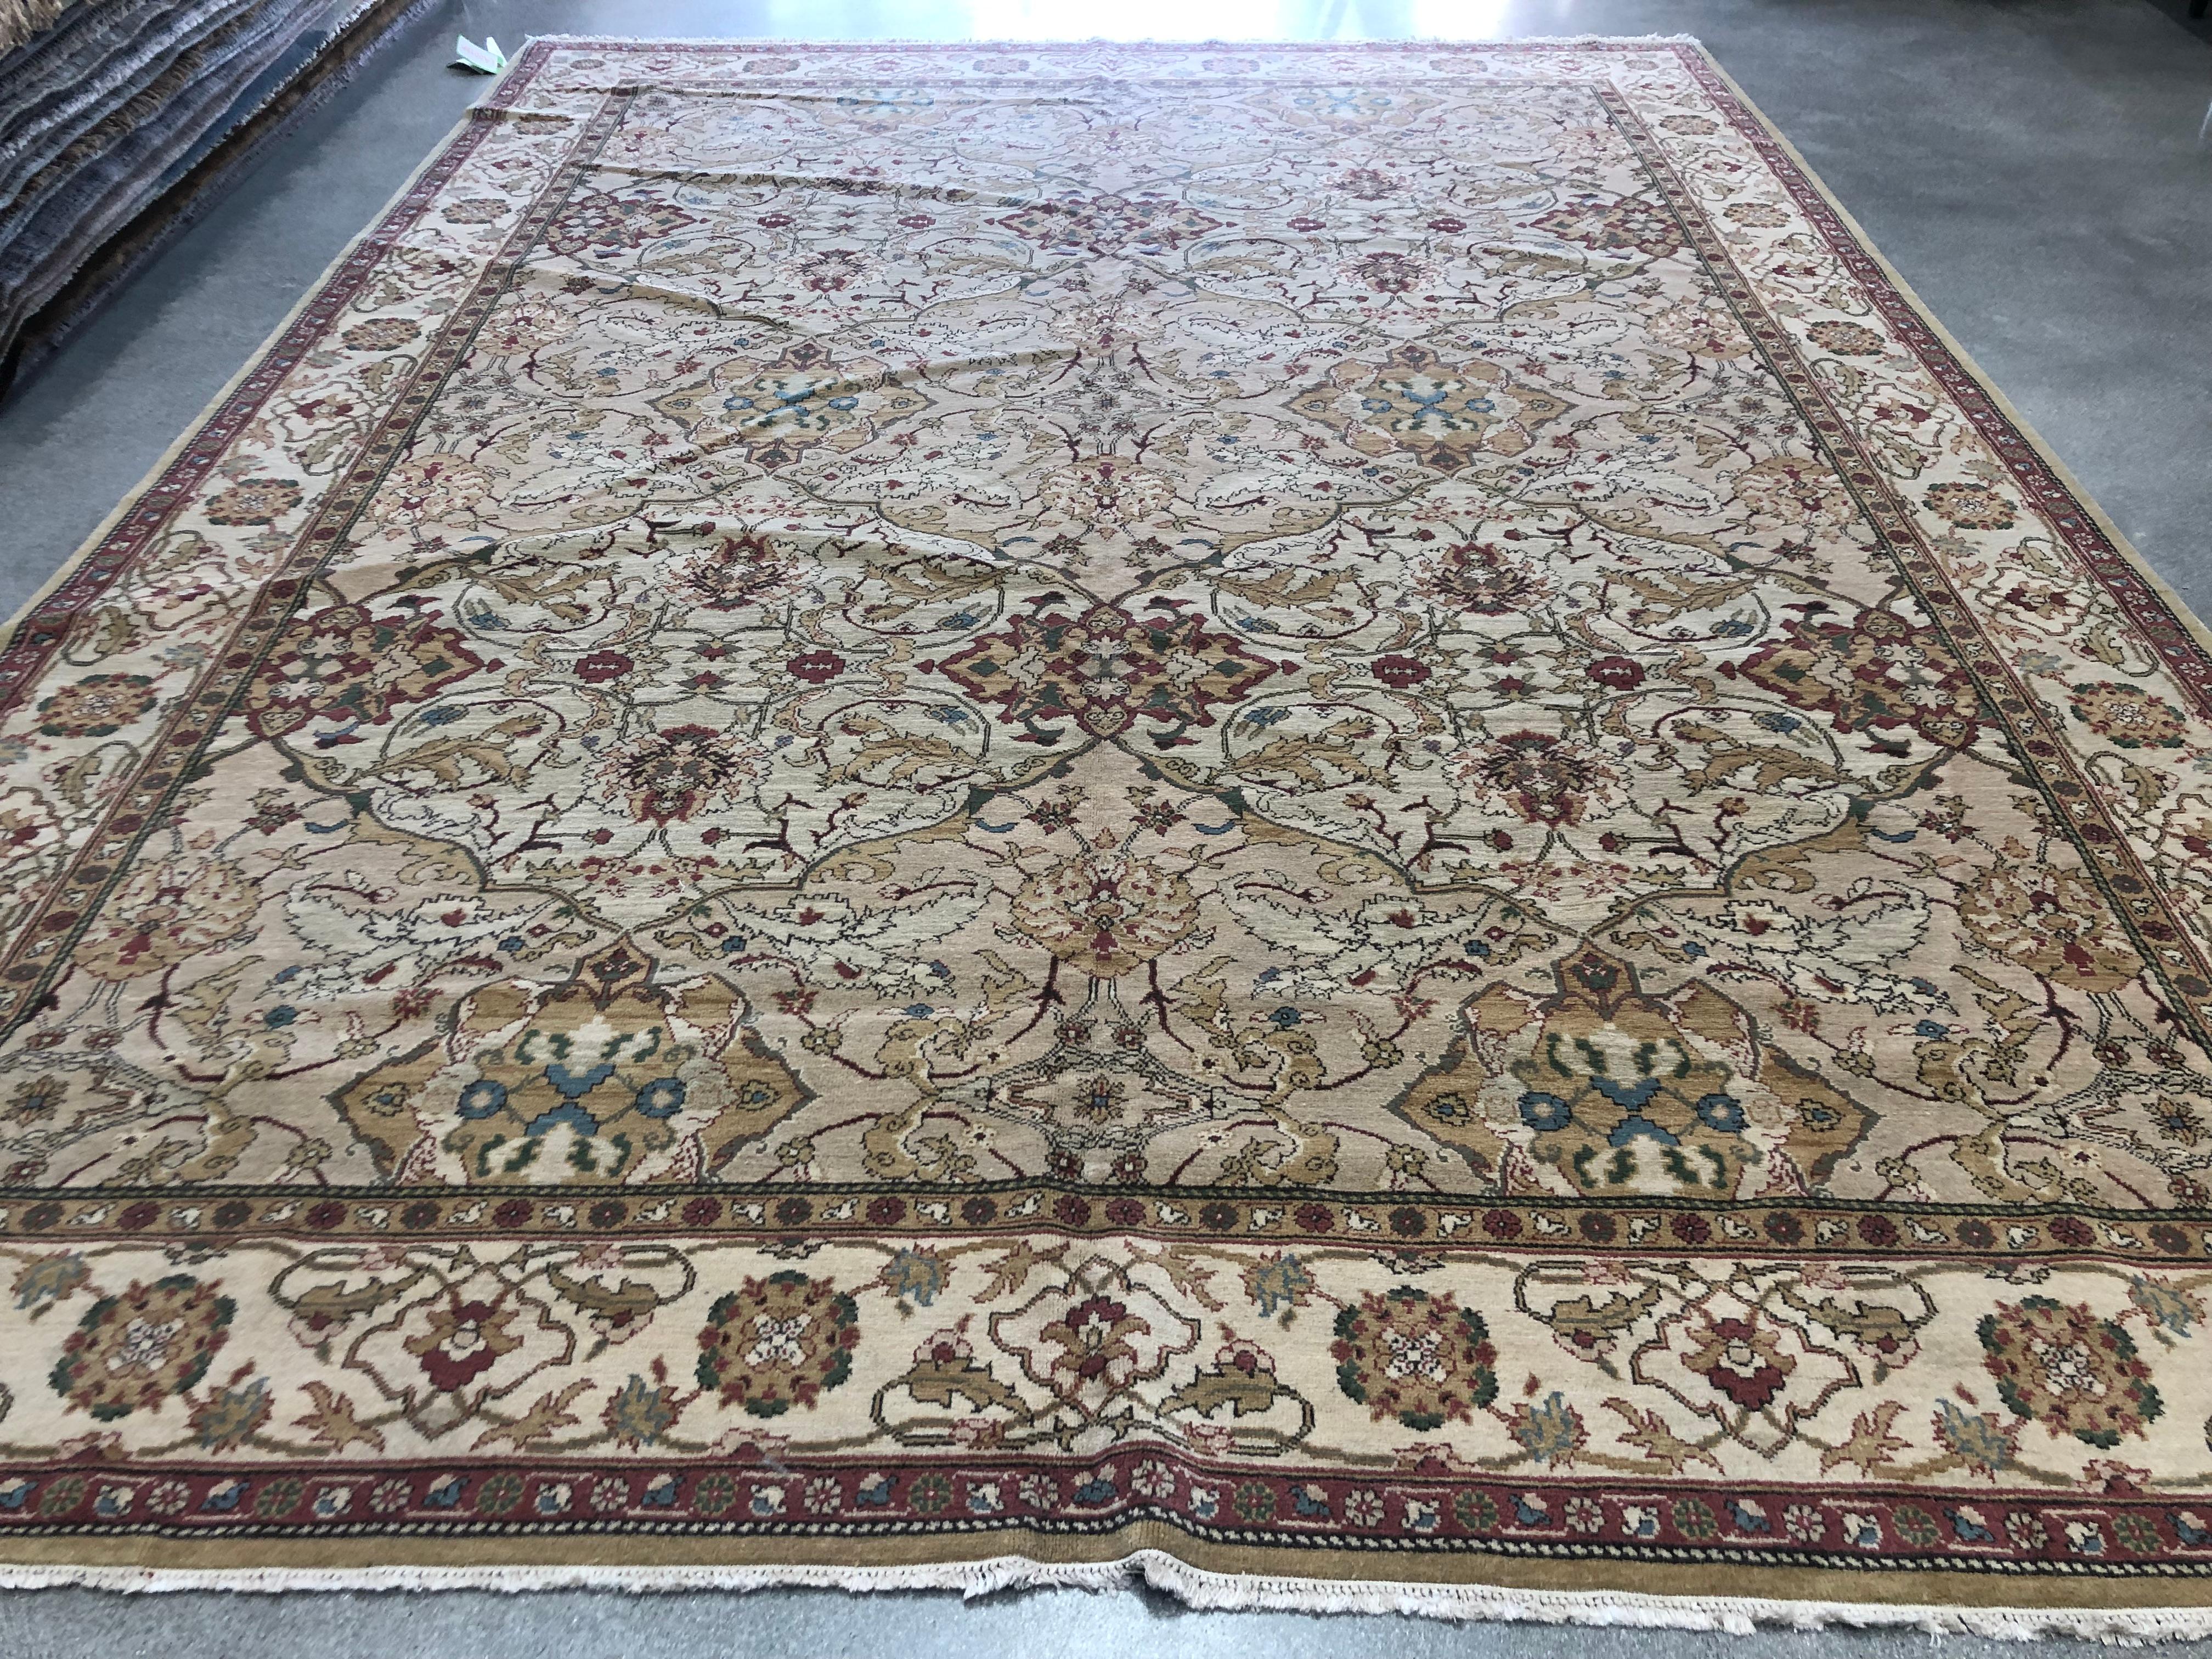 An intricate floral design of red, blue, gold and green lies at the heart of this fascinating area rug. A lighter cream border surrounds and draws attention to the slightly darker beige core with floral ribbons of gold and red tying the spaces